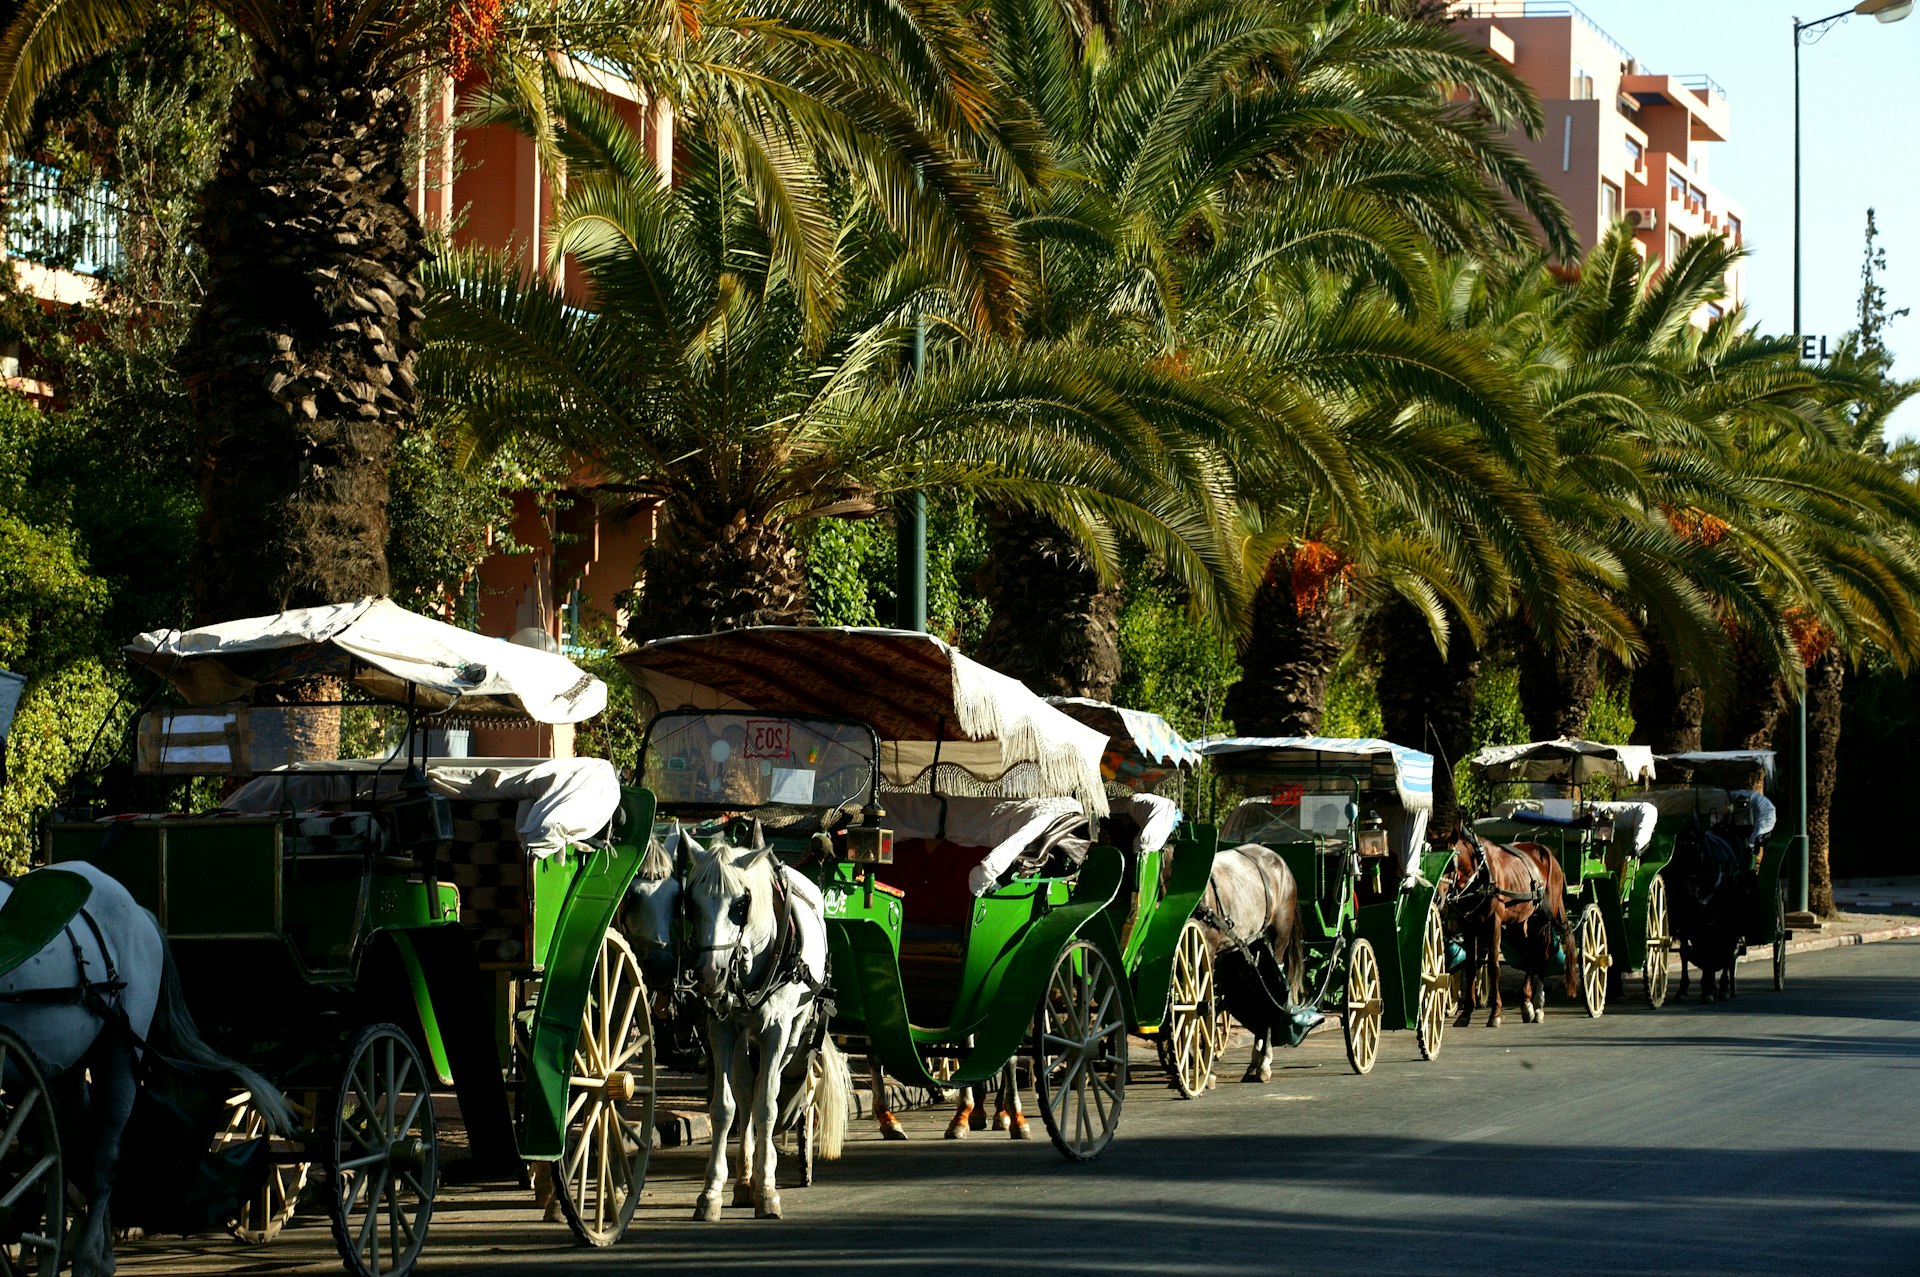 A line of horse-drawn carriages waits on the street in Marrakesh, Morocco